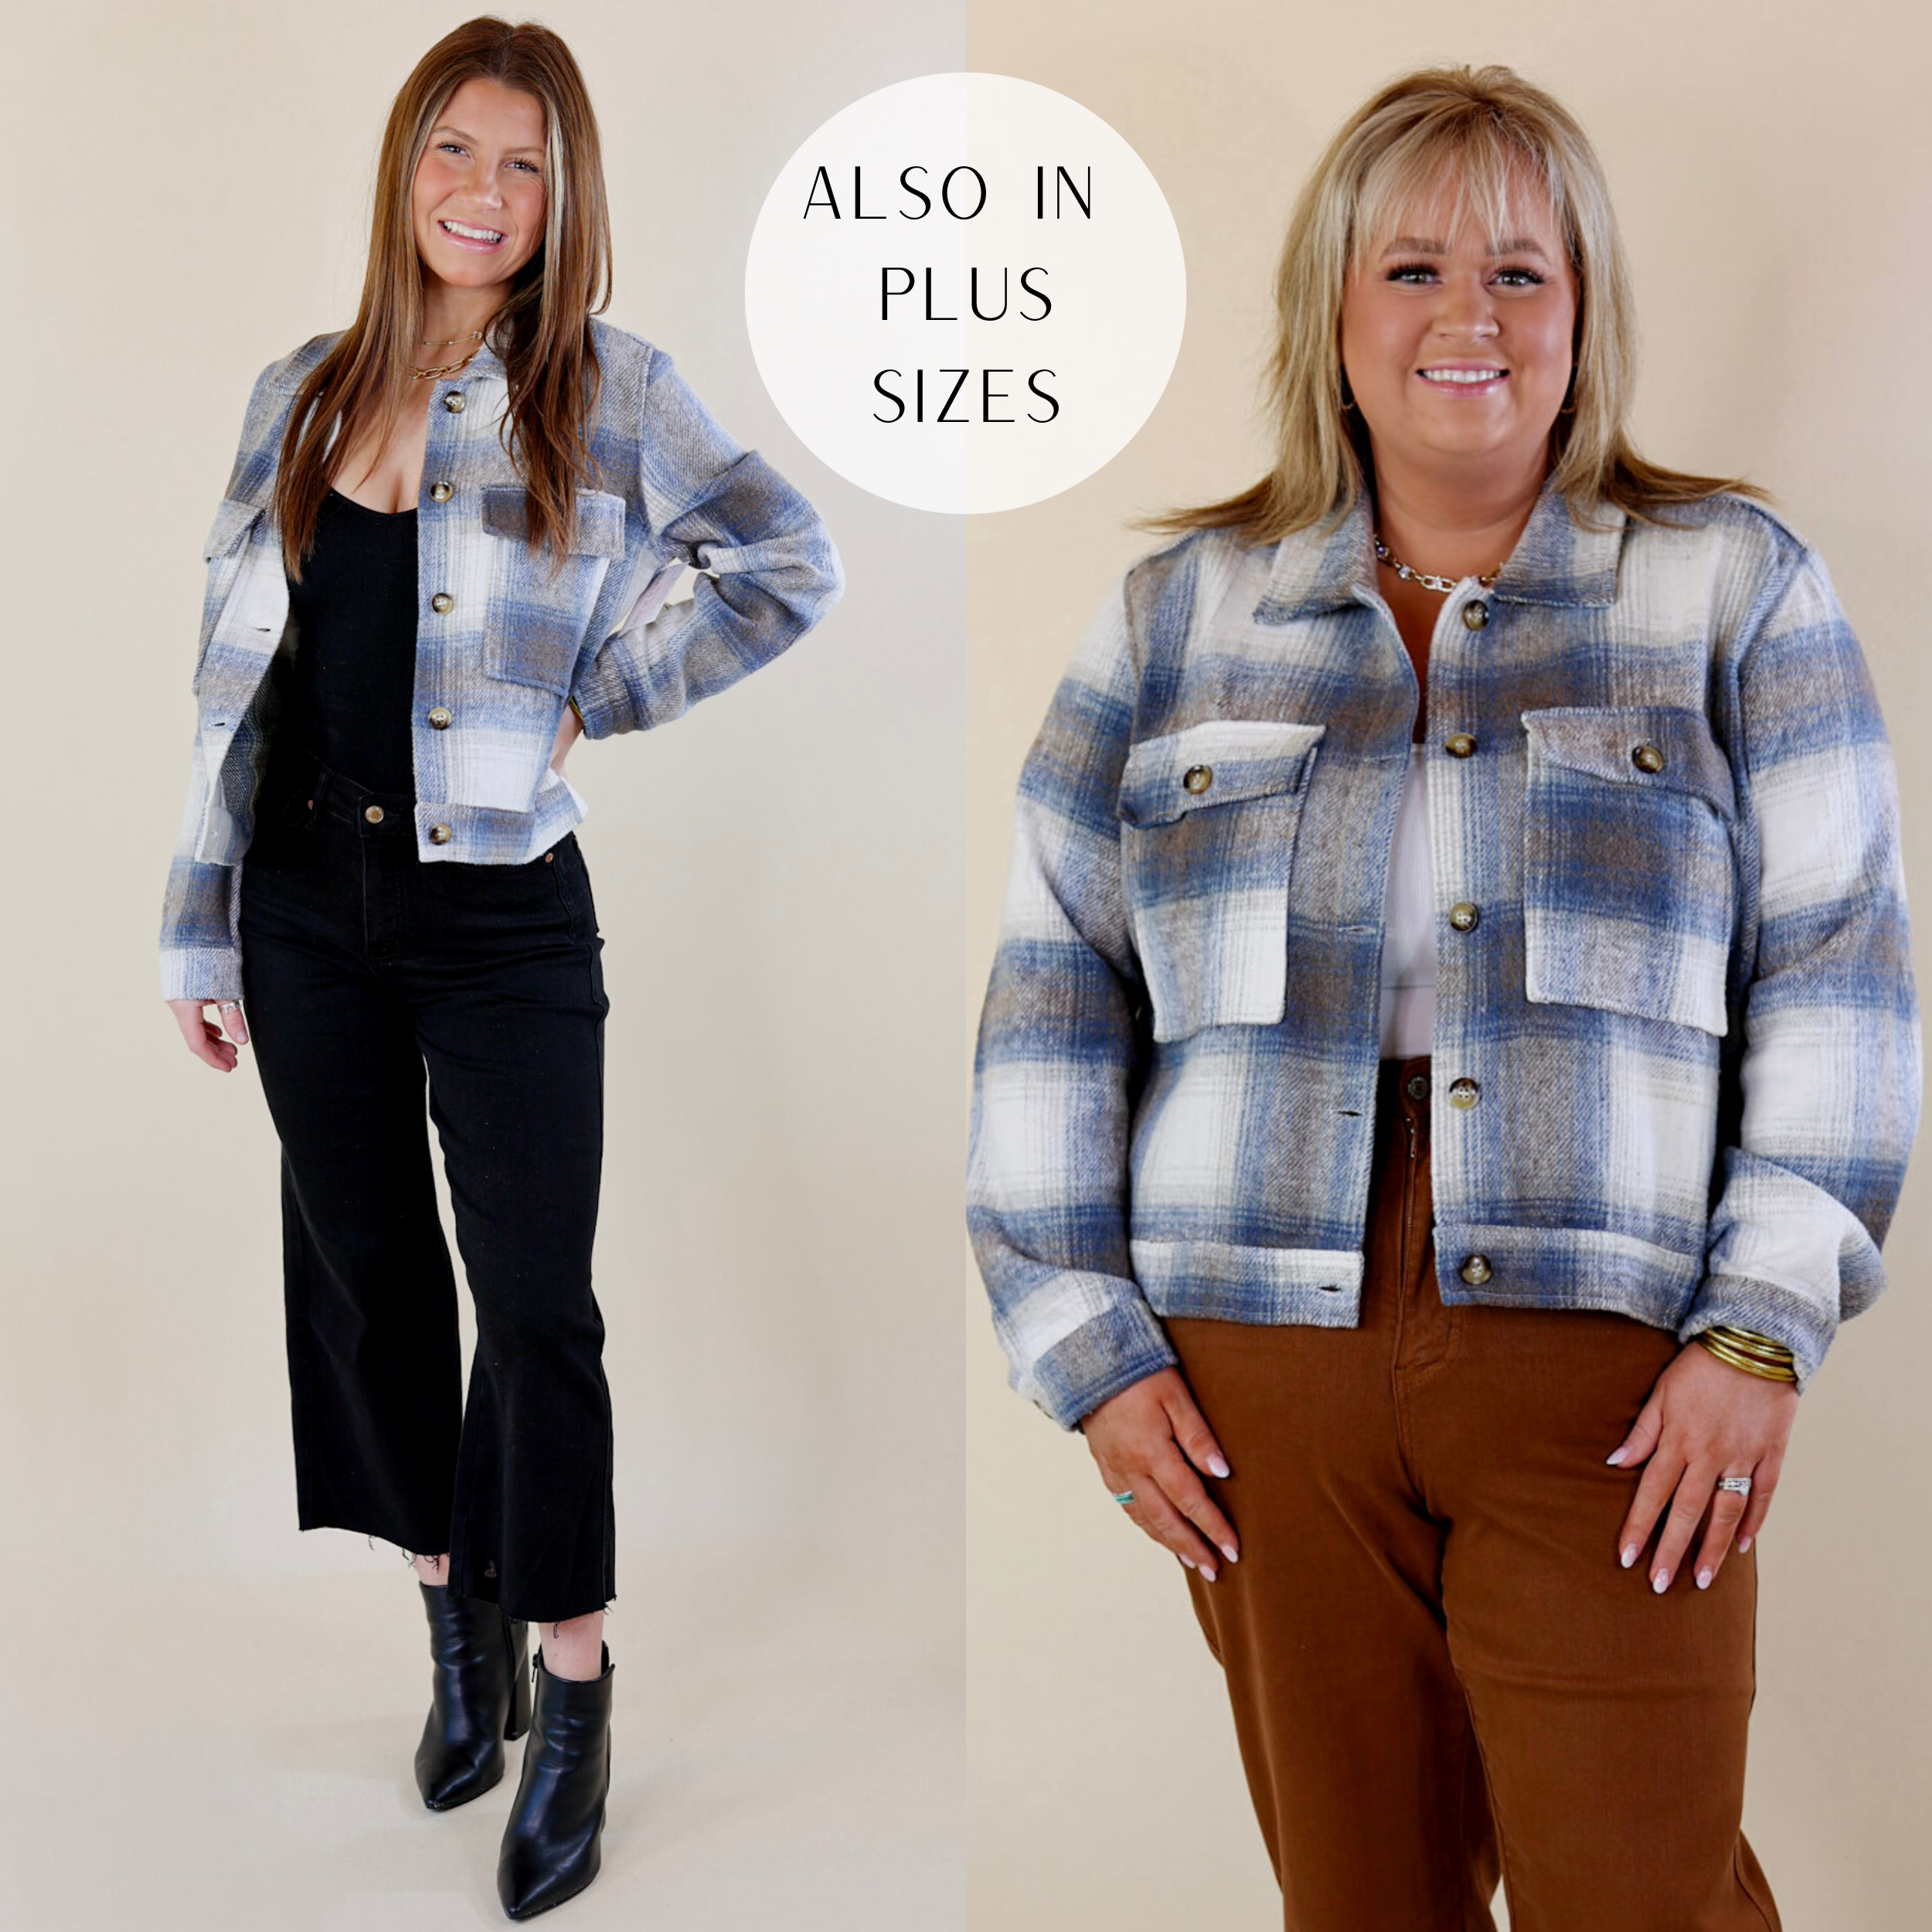 In the picture the model is wearing a button up cropped plaid jacket in blue mix with a white background